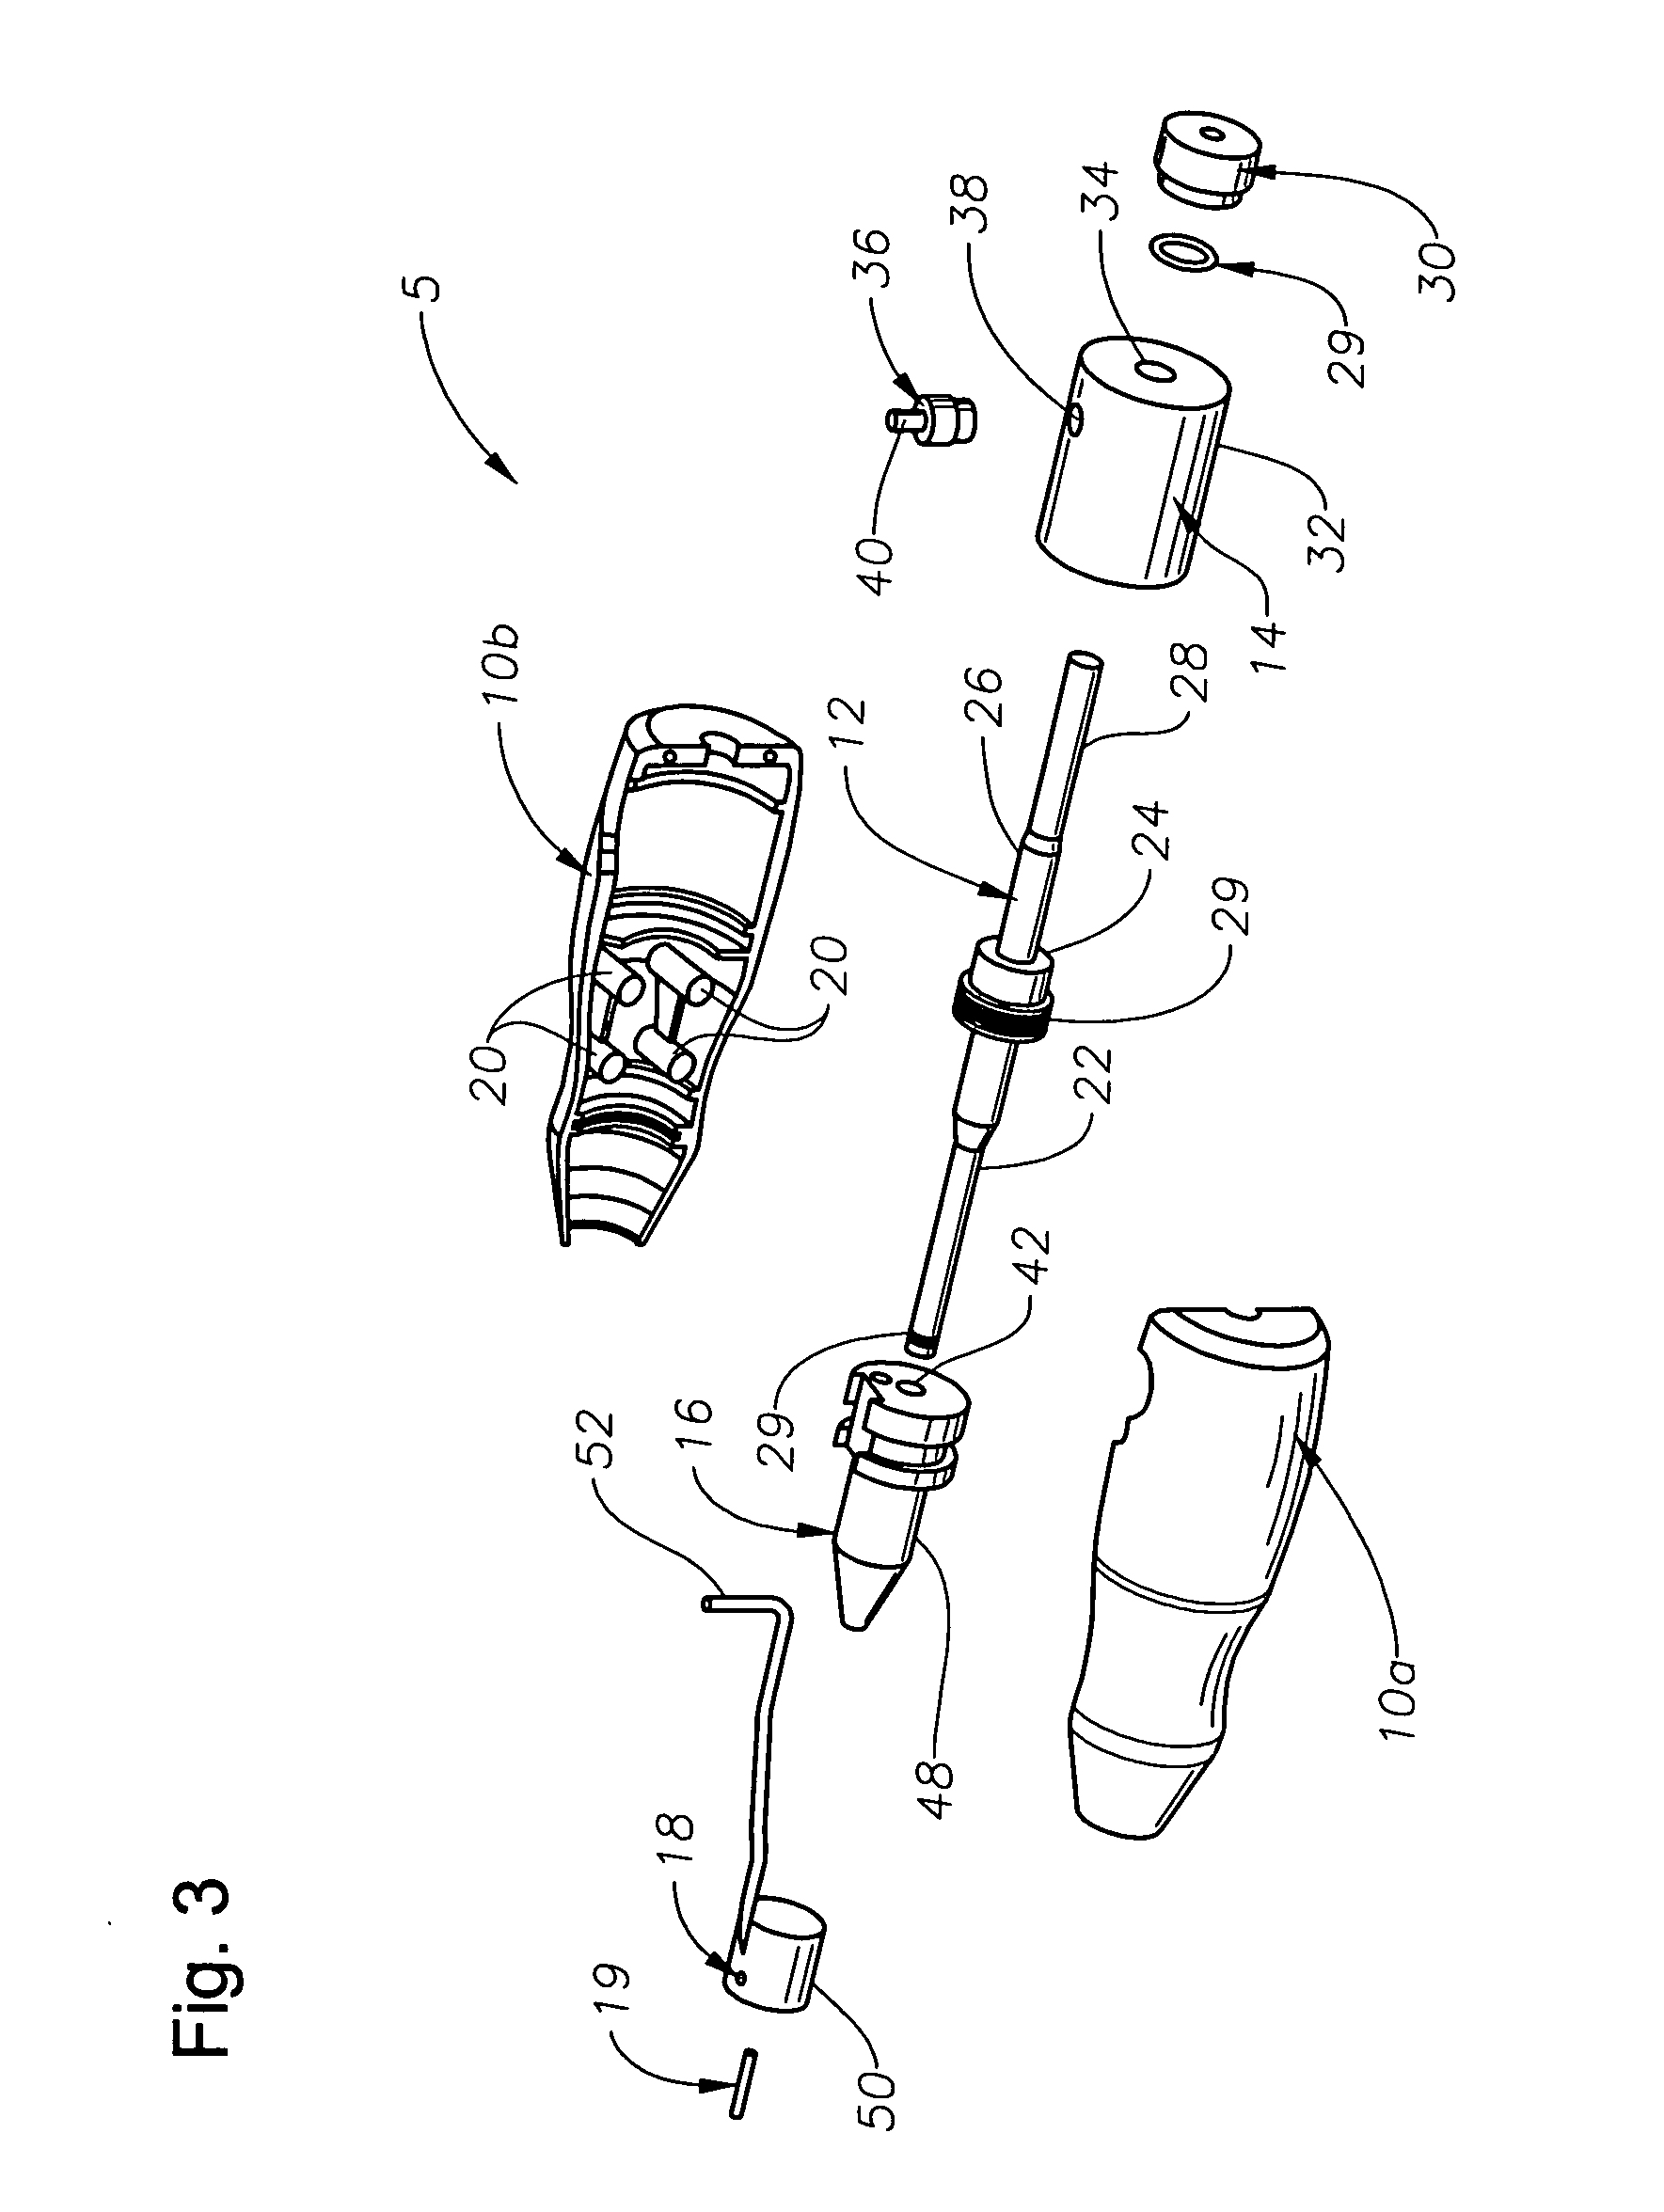 Ophthalmic injector